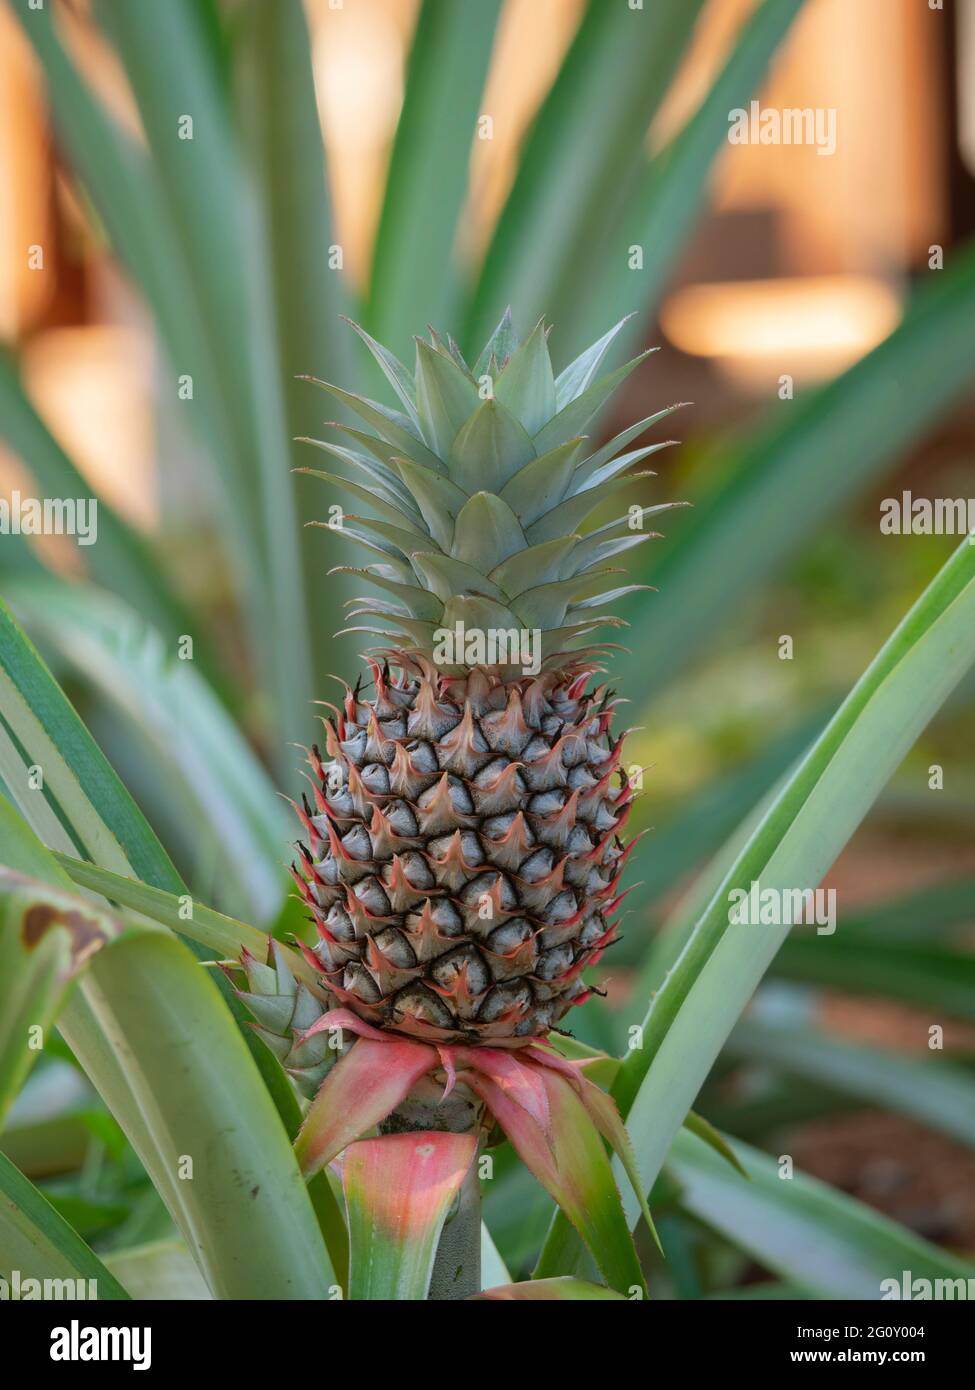 A pineapple, Ananas comosus, plant with fruit. Stock Photo